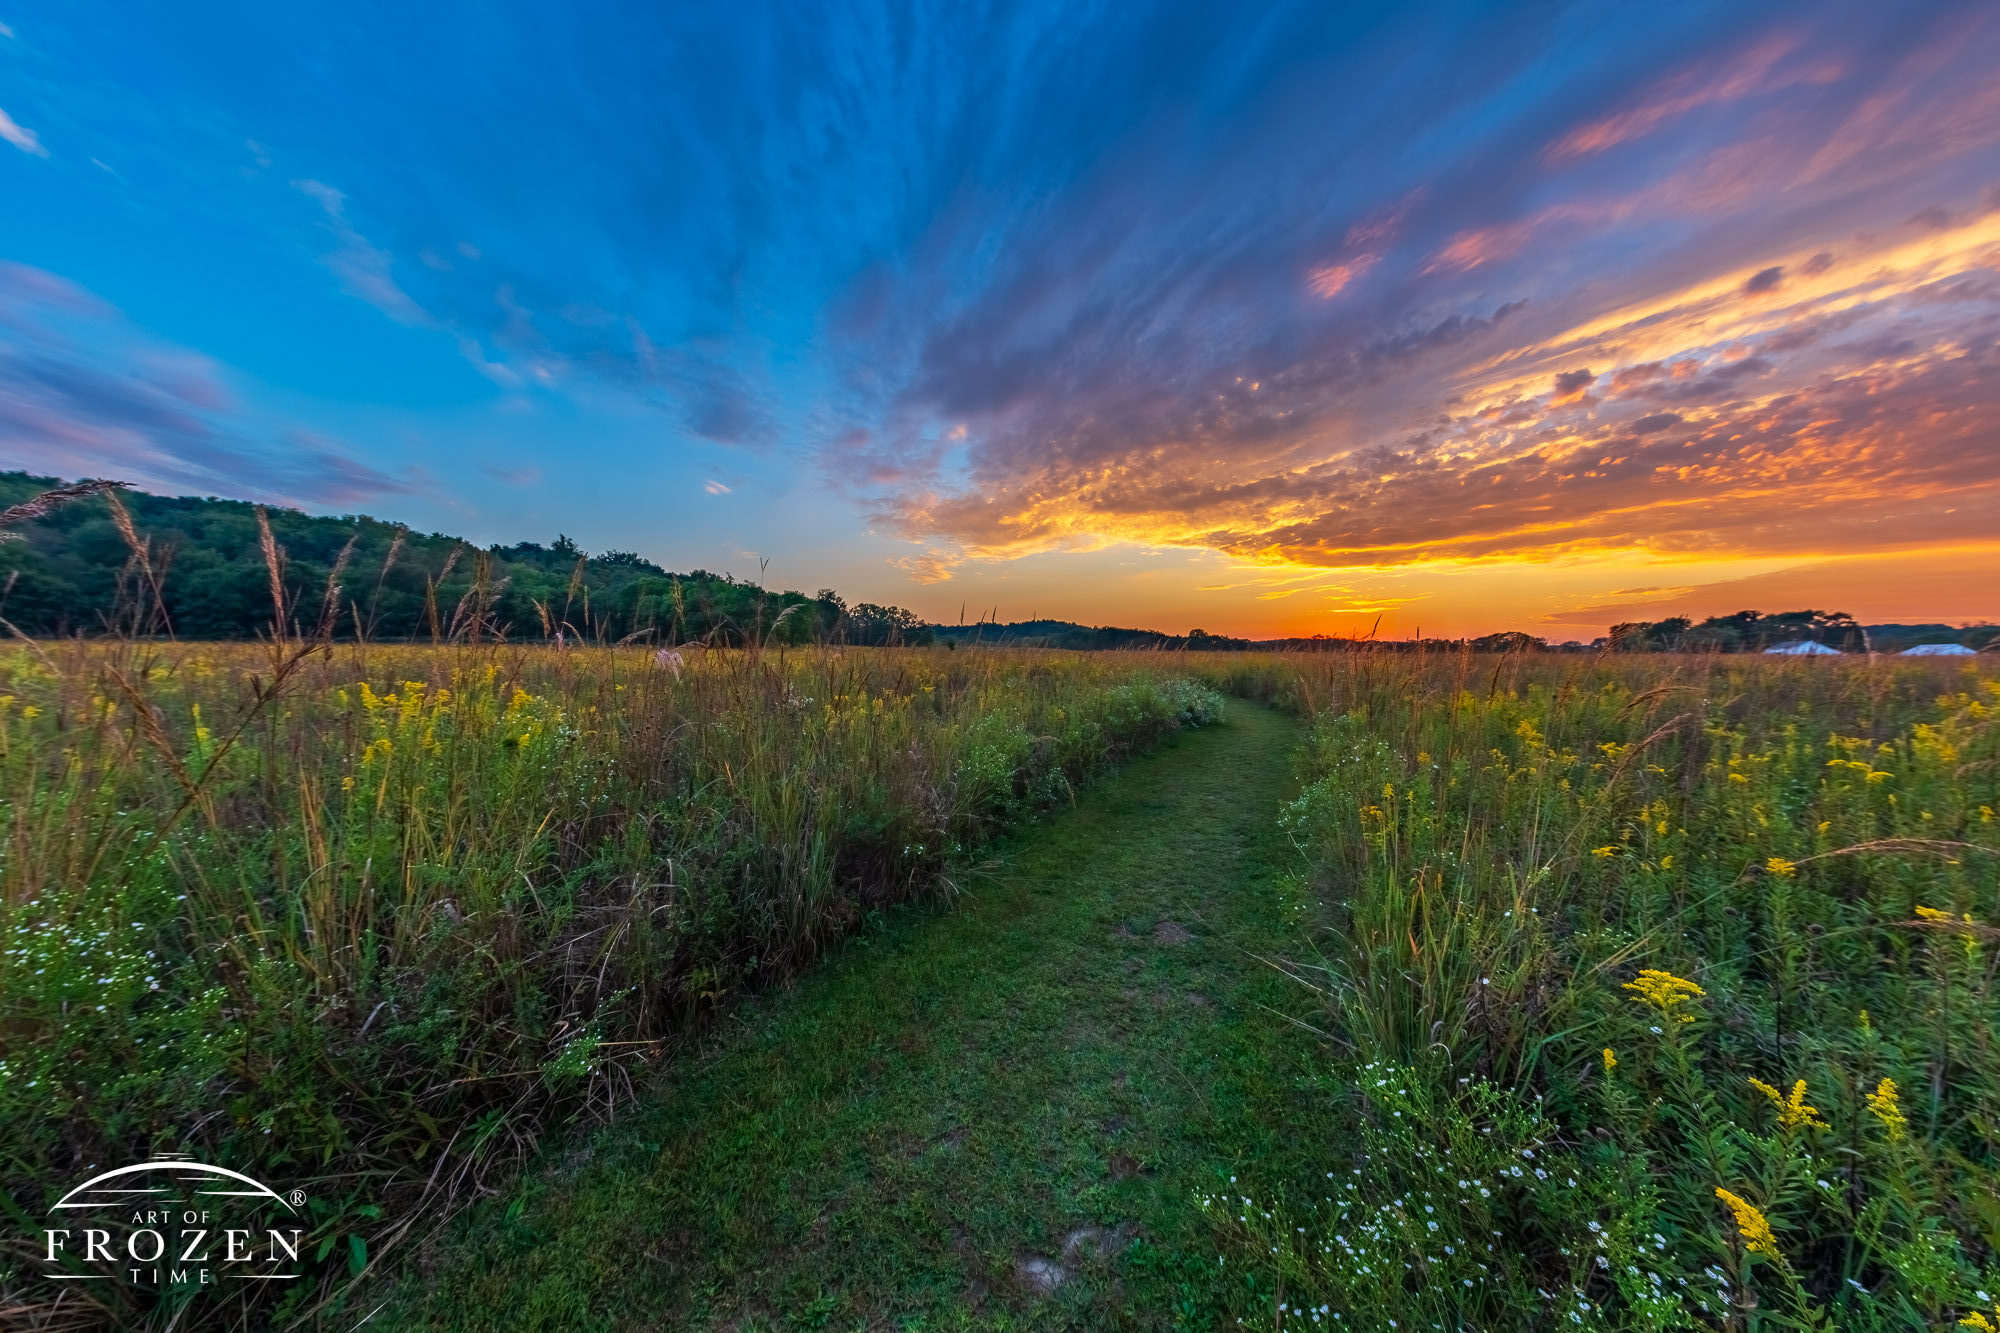 Landscape Fine art photography featuring a footpath meandering through the tallgrass prairie of Morris Reserve under colorful Ohio skies.